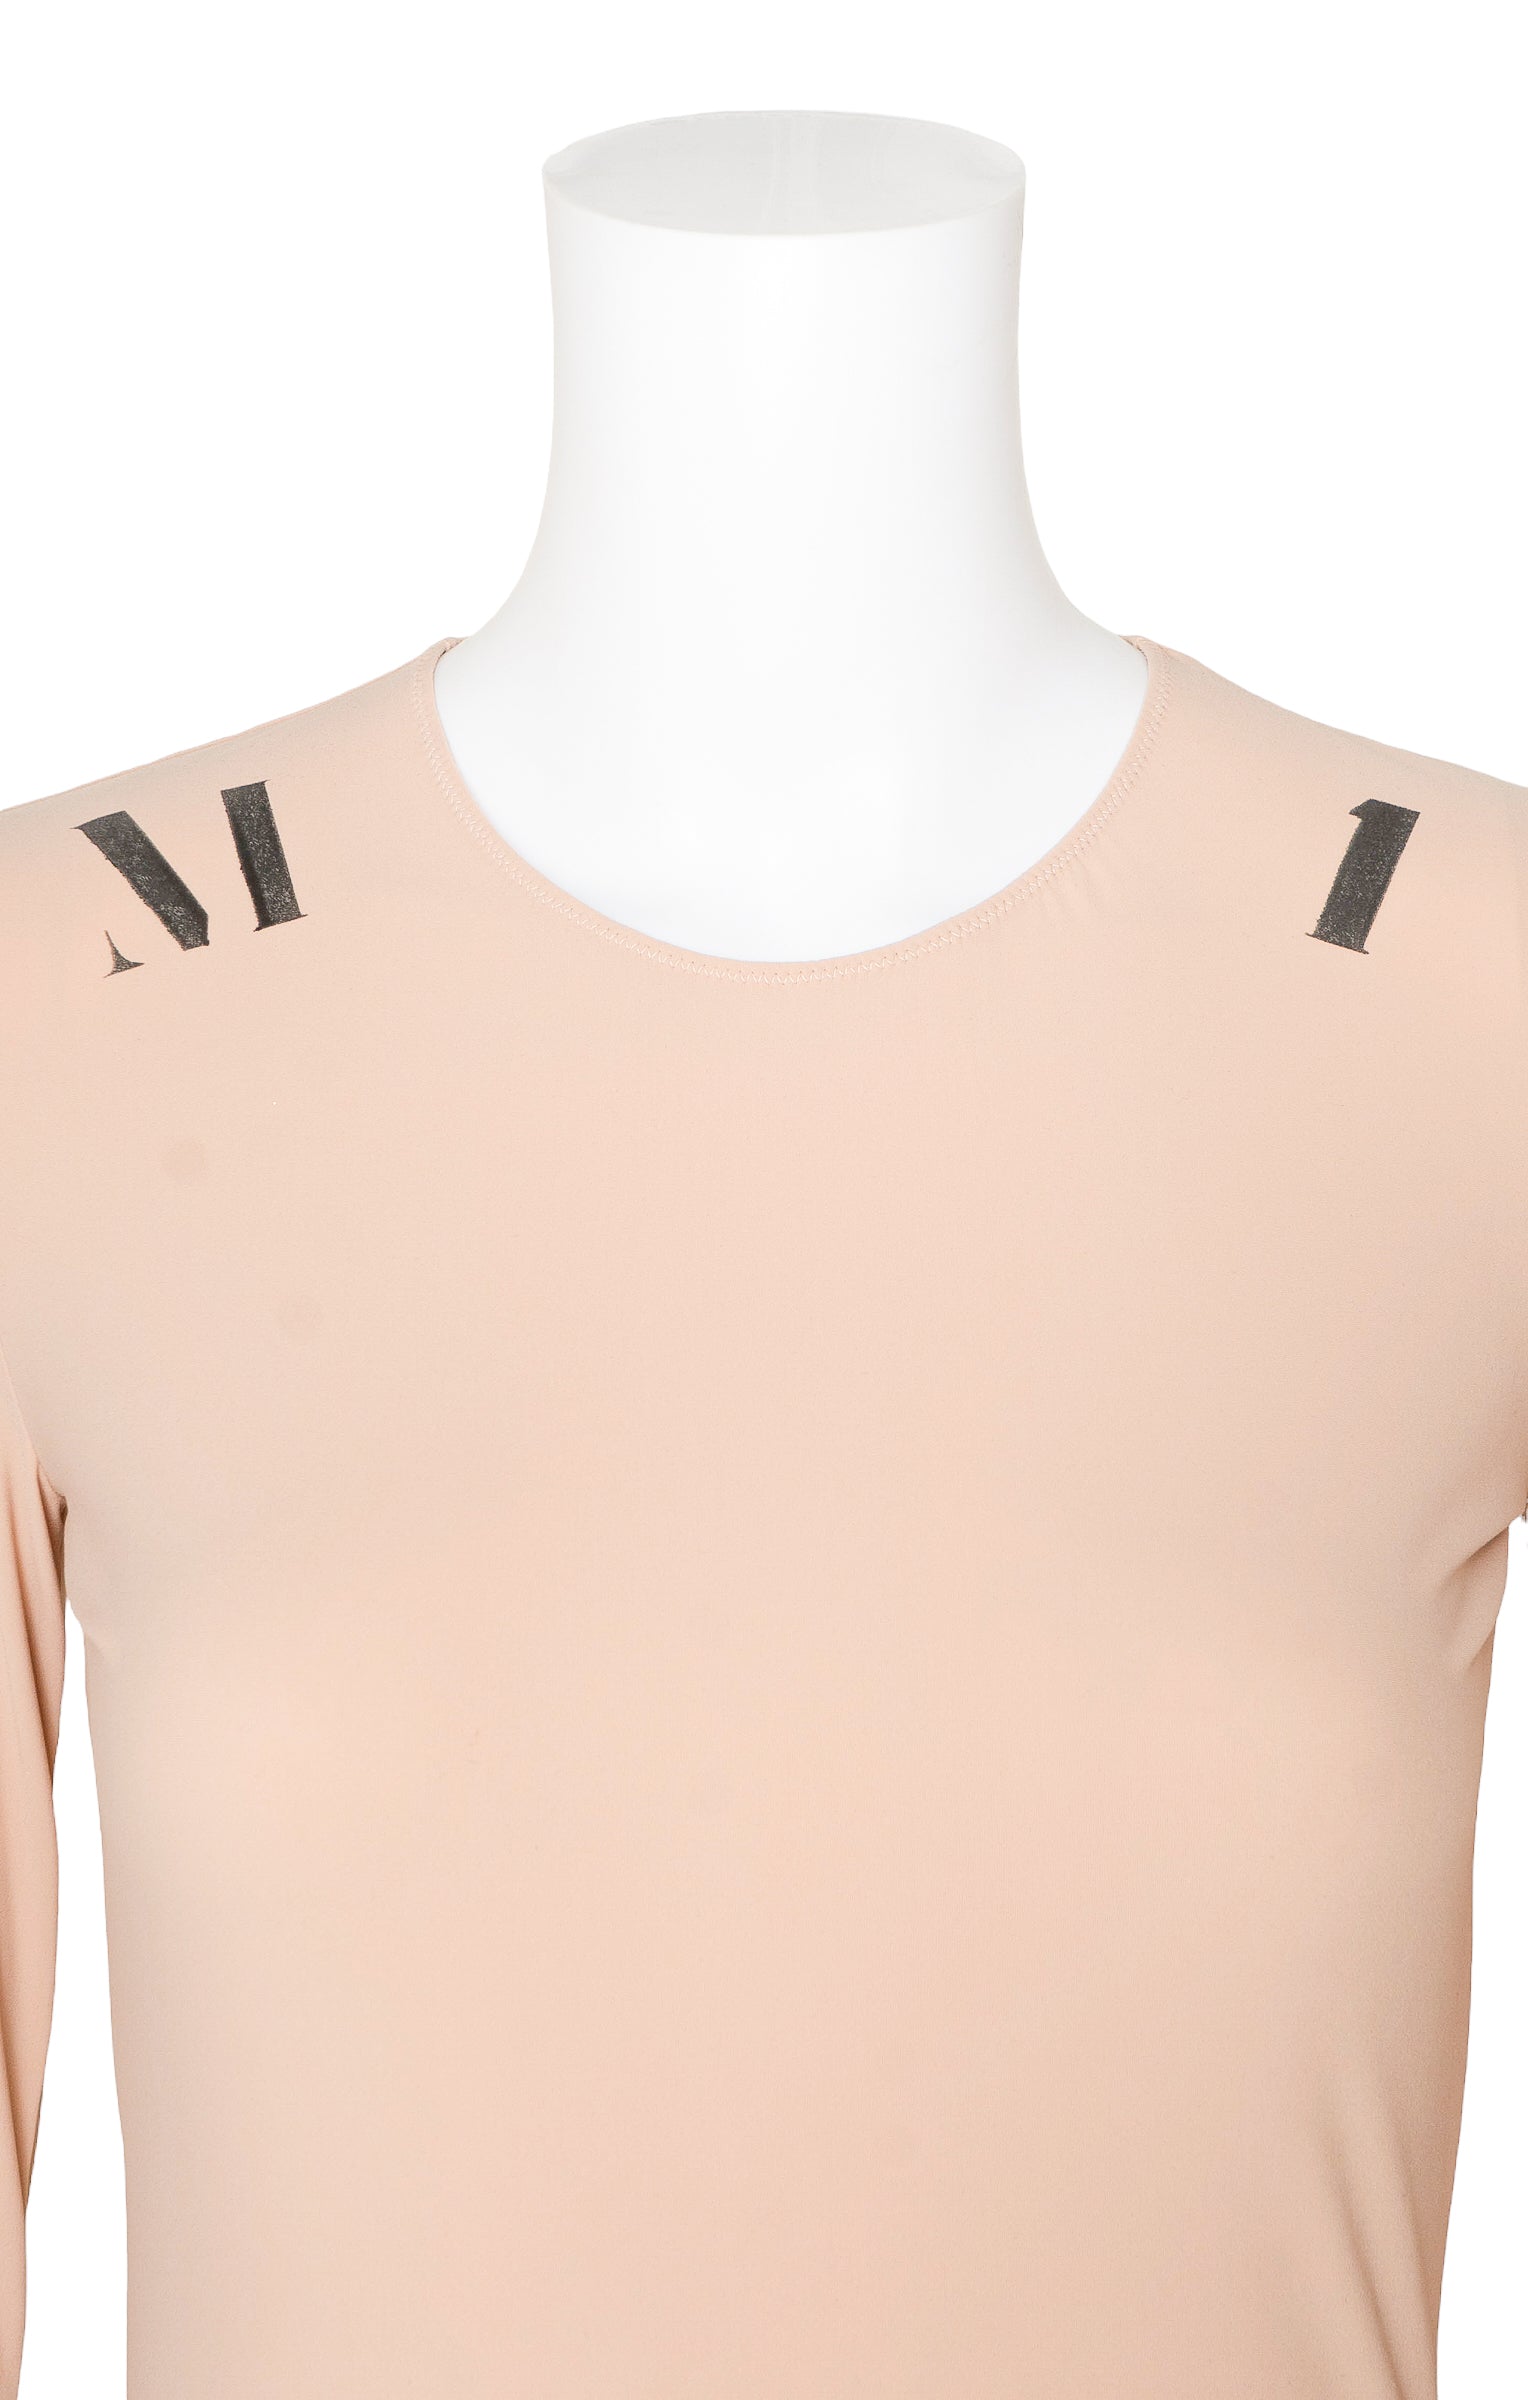 MAISON MARTIN MARGIELA (RARE & NEW) with tags Bodysuit Size: IT 42 / Comparable to US 4-6